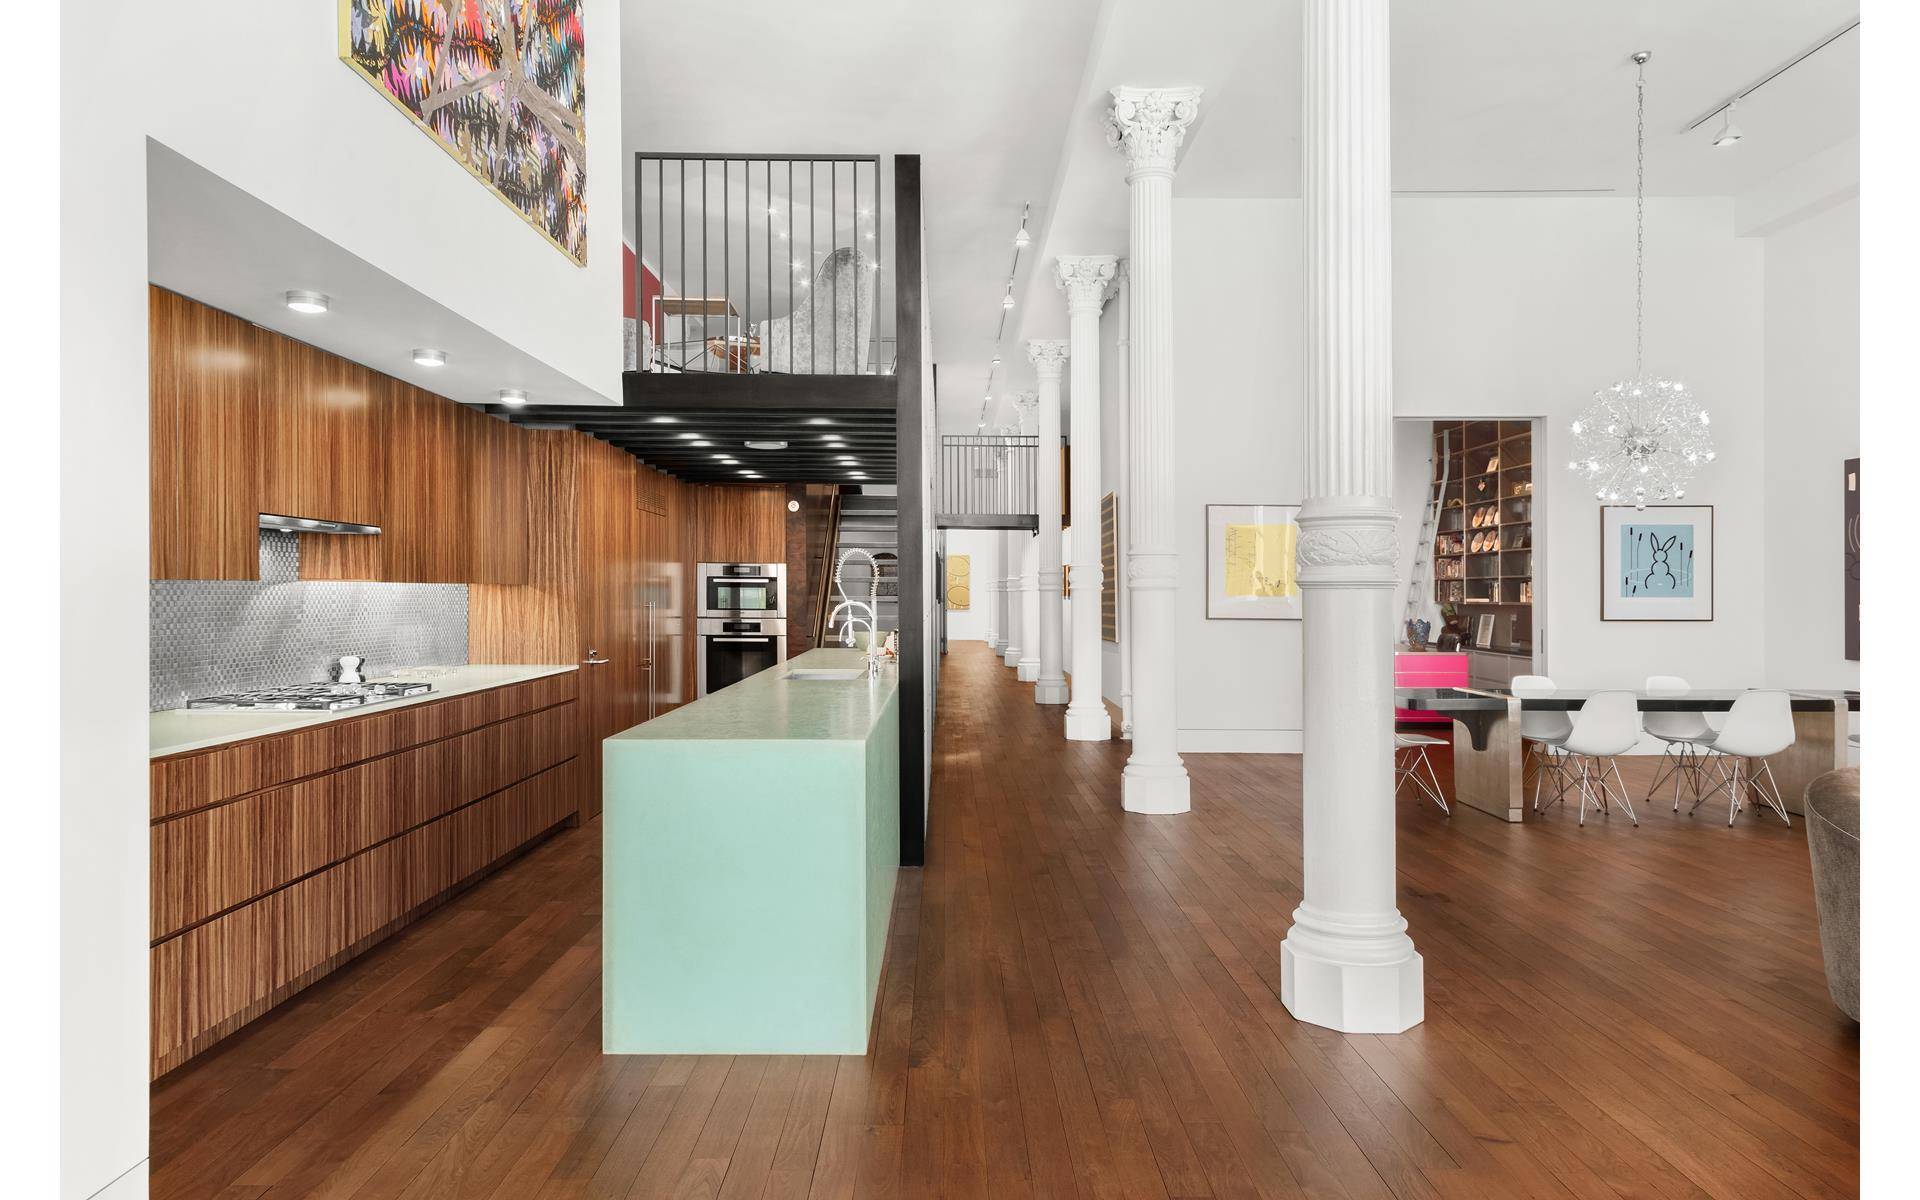 Awe inspiring scale, 16 foot ceilings, and brilliant condition come together in the heart of historic SoHo !